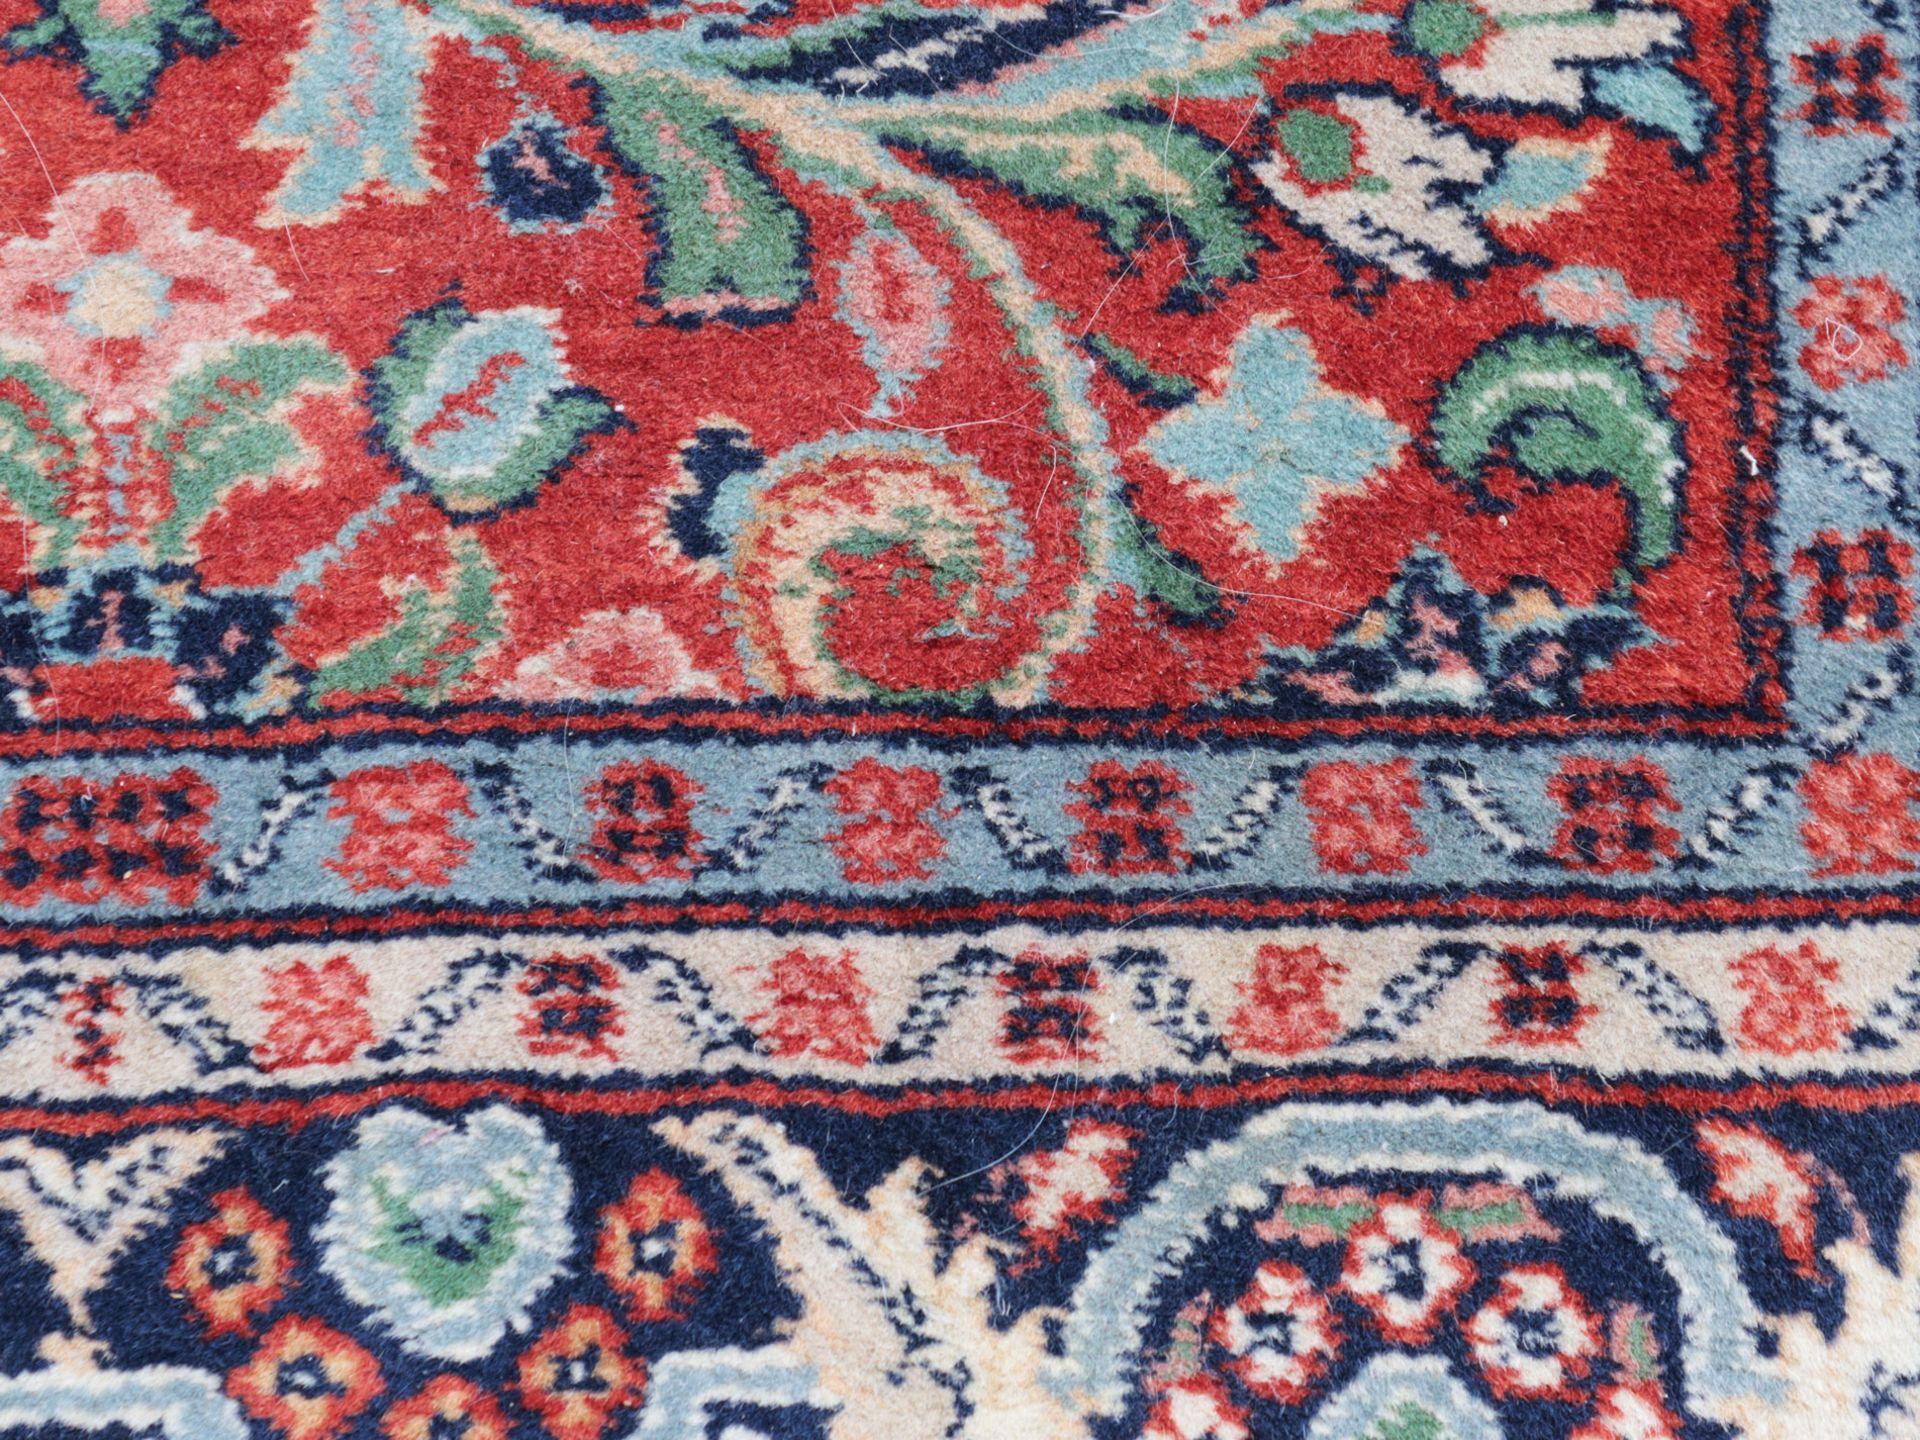 Vintage Oriental Pakistani Wool Rug Runner Red with Floral Ornaments 5